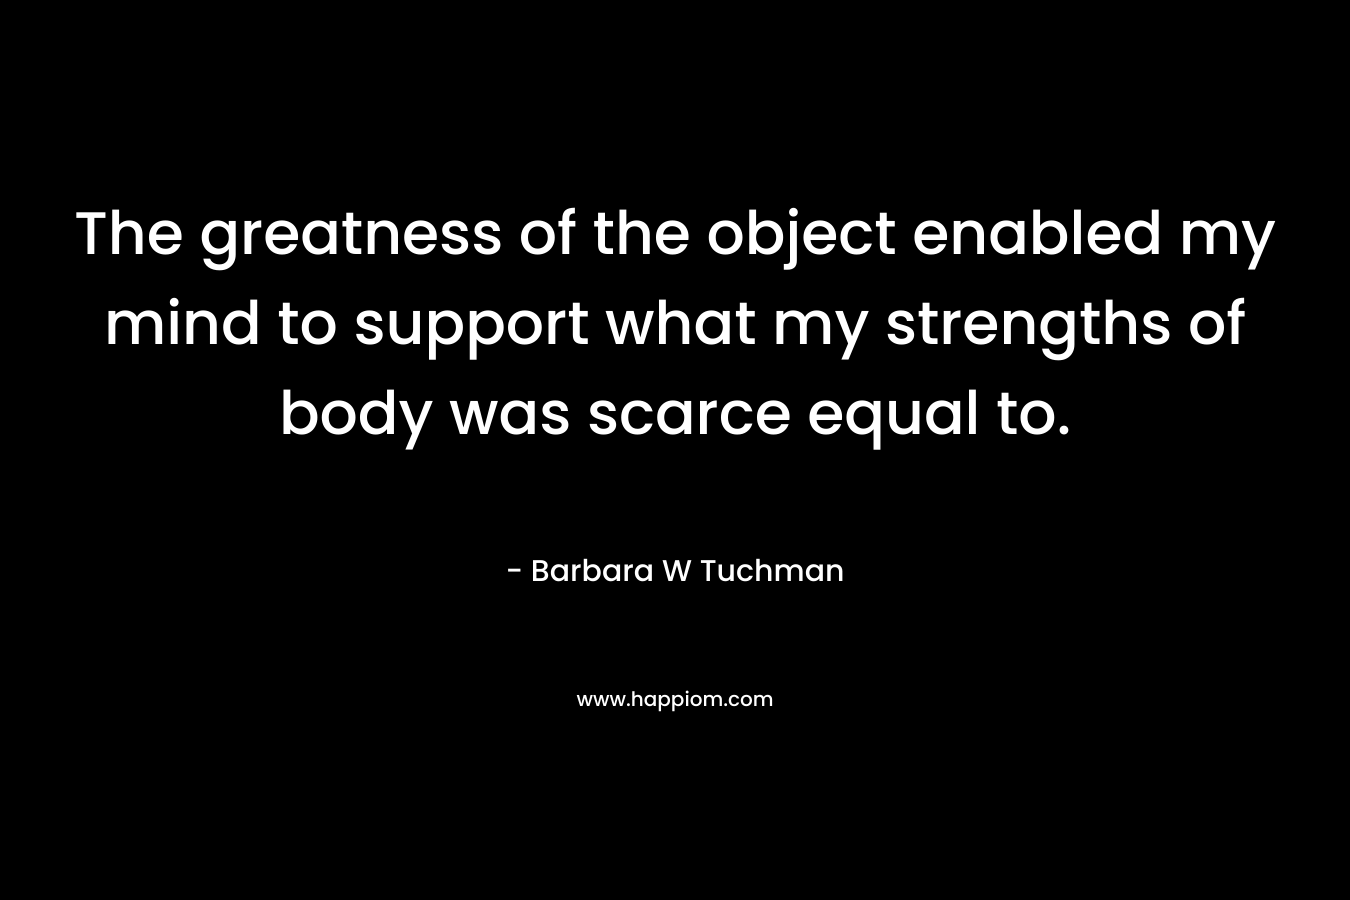 The greatness of the object enabled my mind to support what my strengths of body was scarce equal to. – Barbara W Tuchman